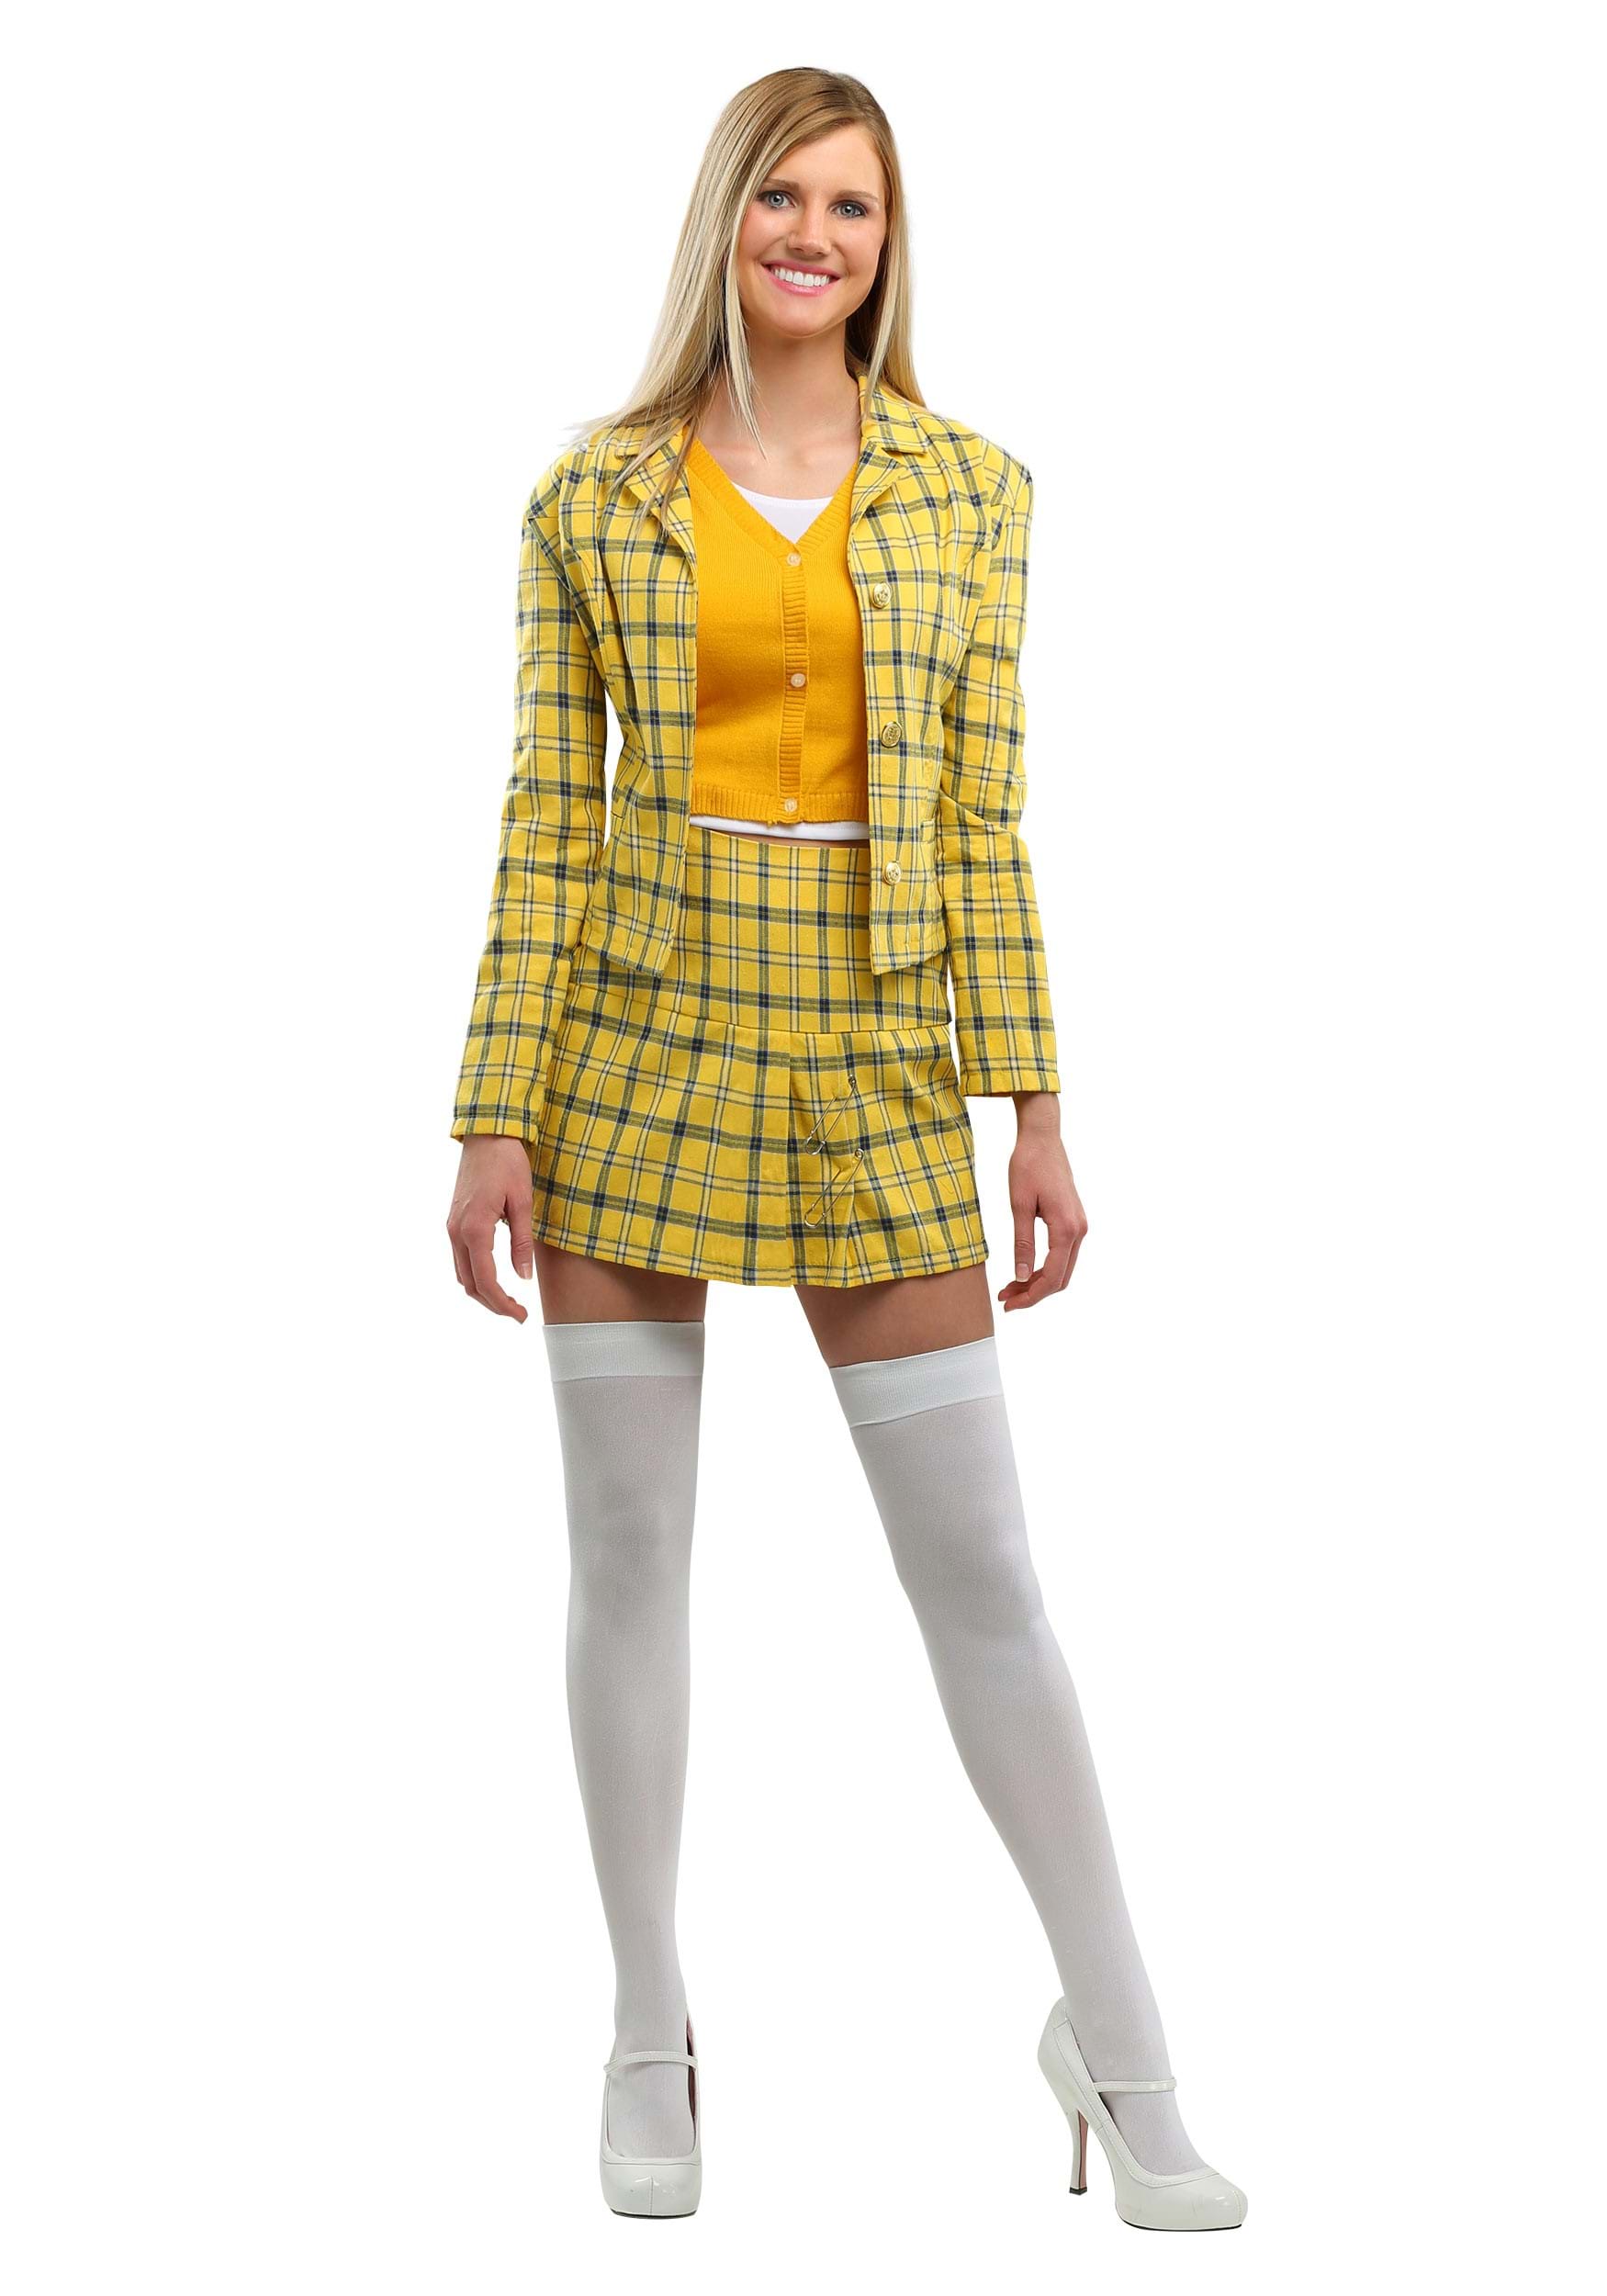 Image of Clueless Cher Plus Size Costume for Women | 90s Movie Costume ID FUN2948PL-5X